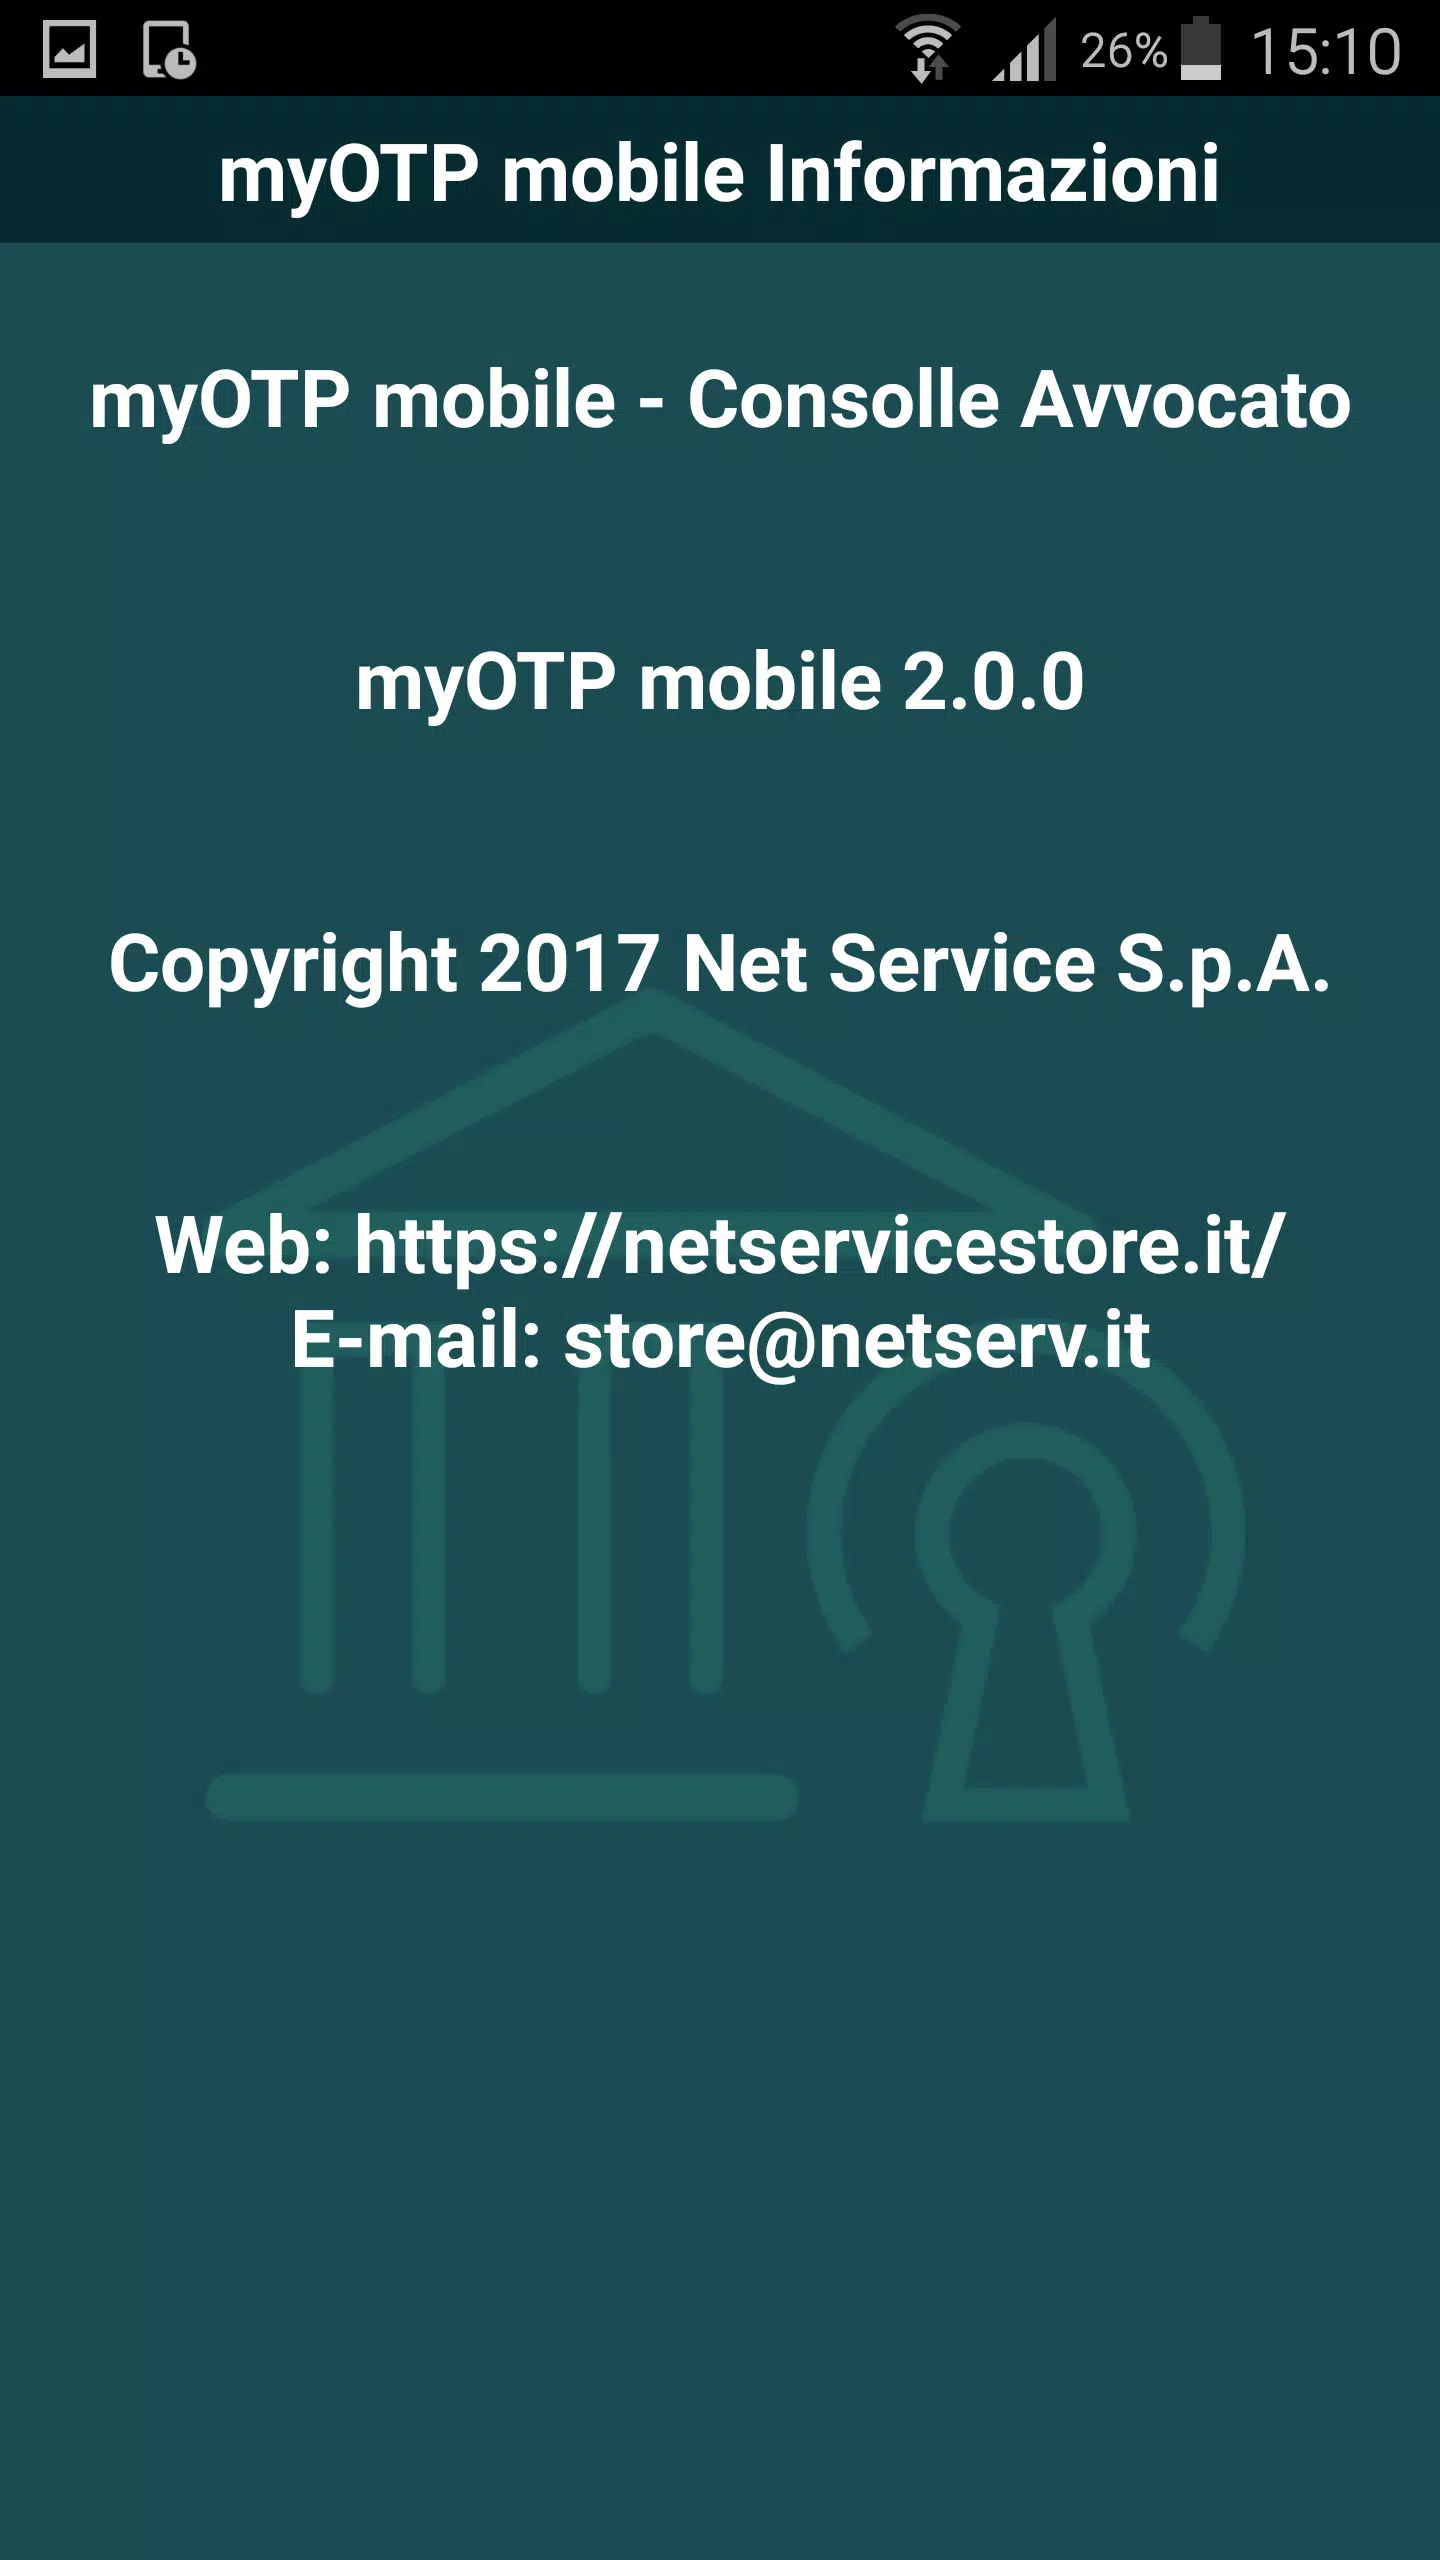 myOTP mobile - Consolle Avvocato for Android - APK Download